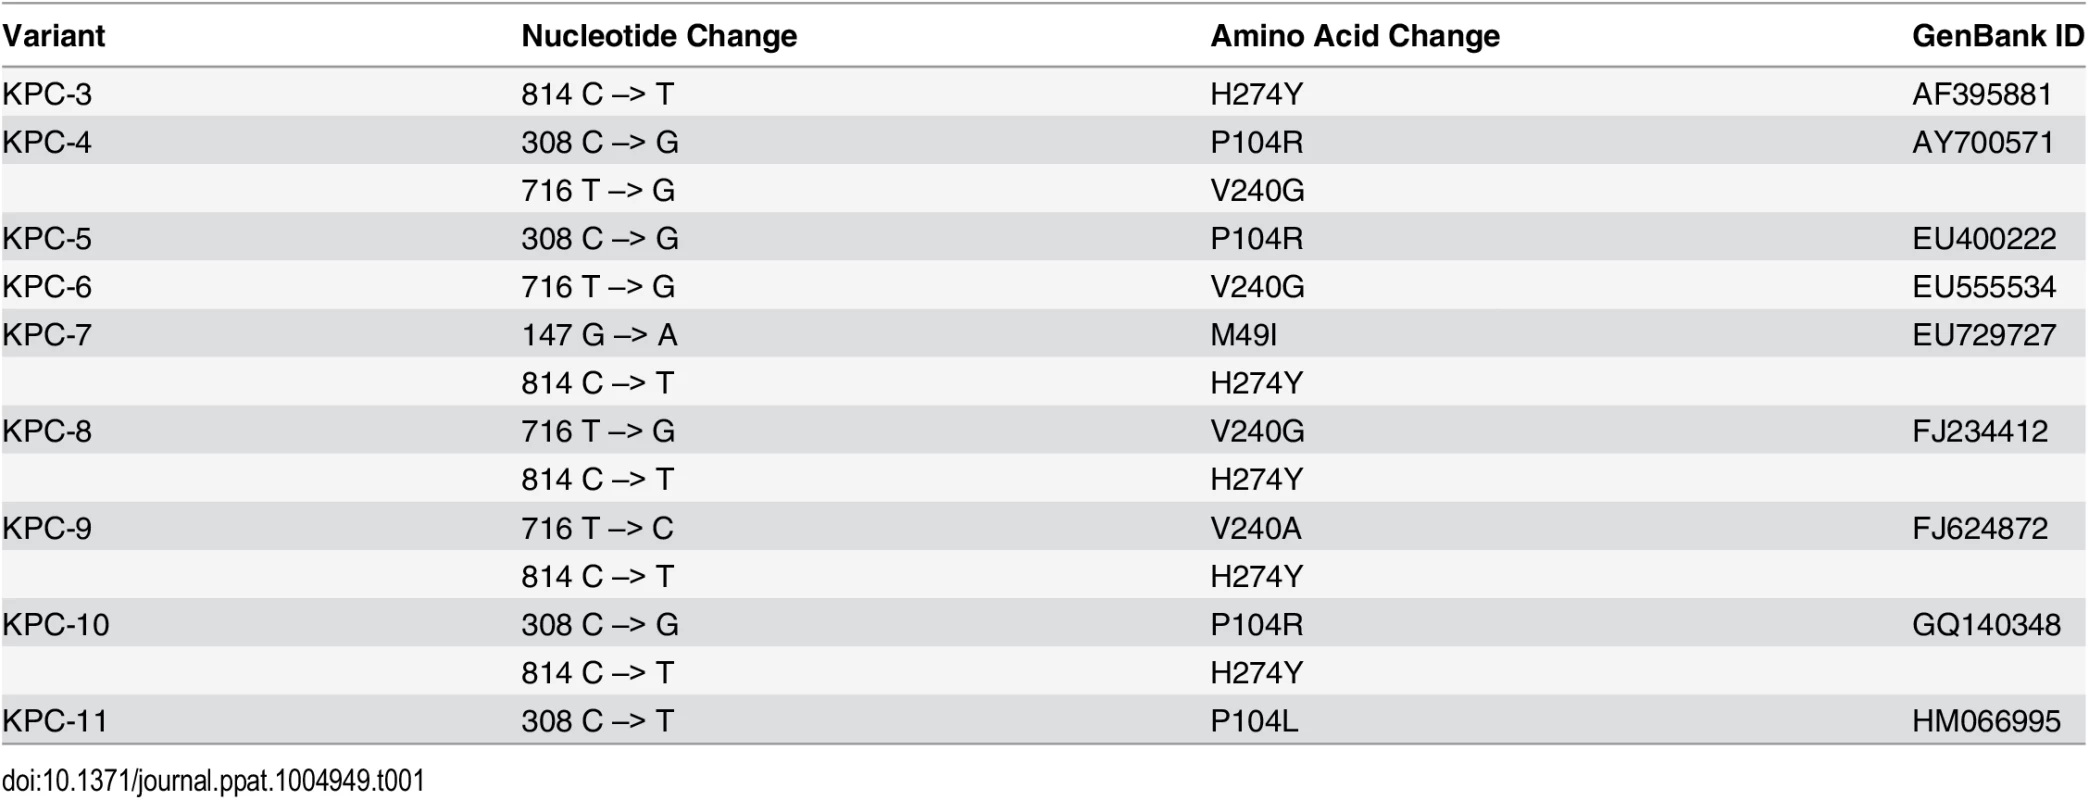 Nucleotide polymorphisms and amino acid changes in variants as compared to KPC-2.